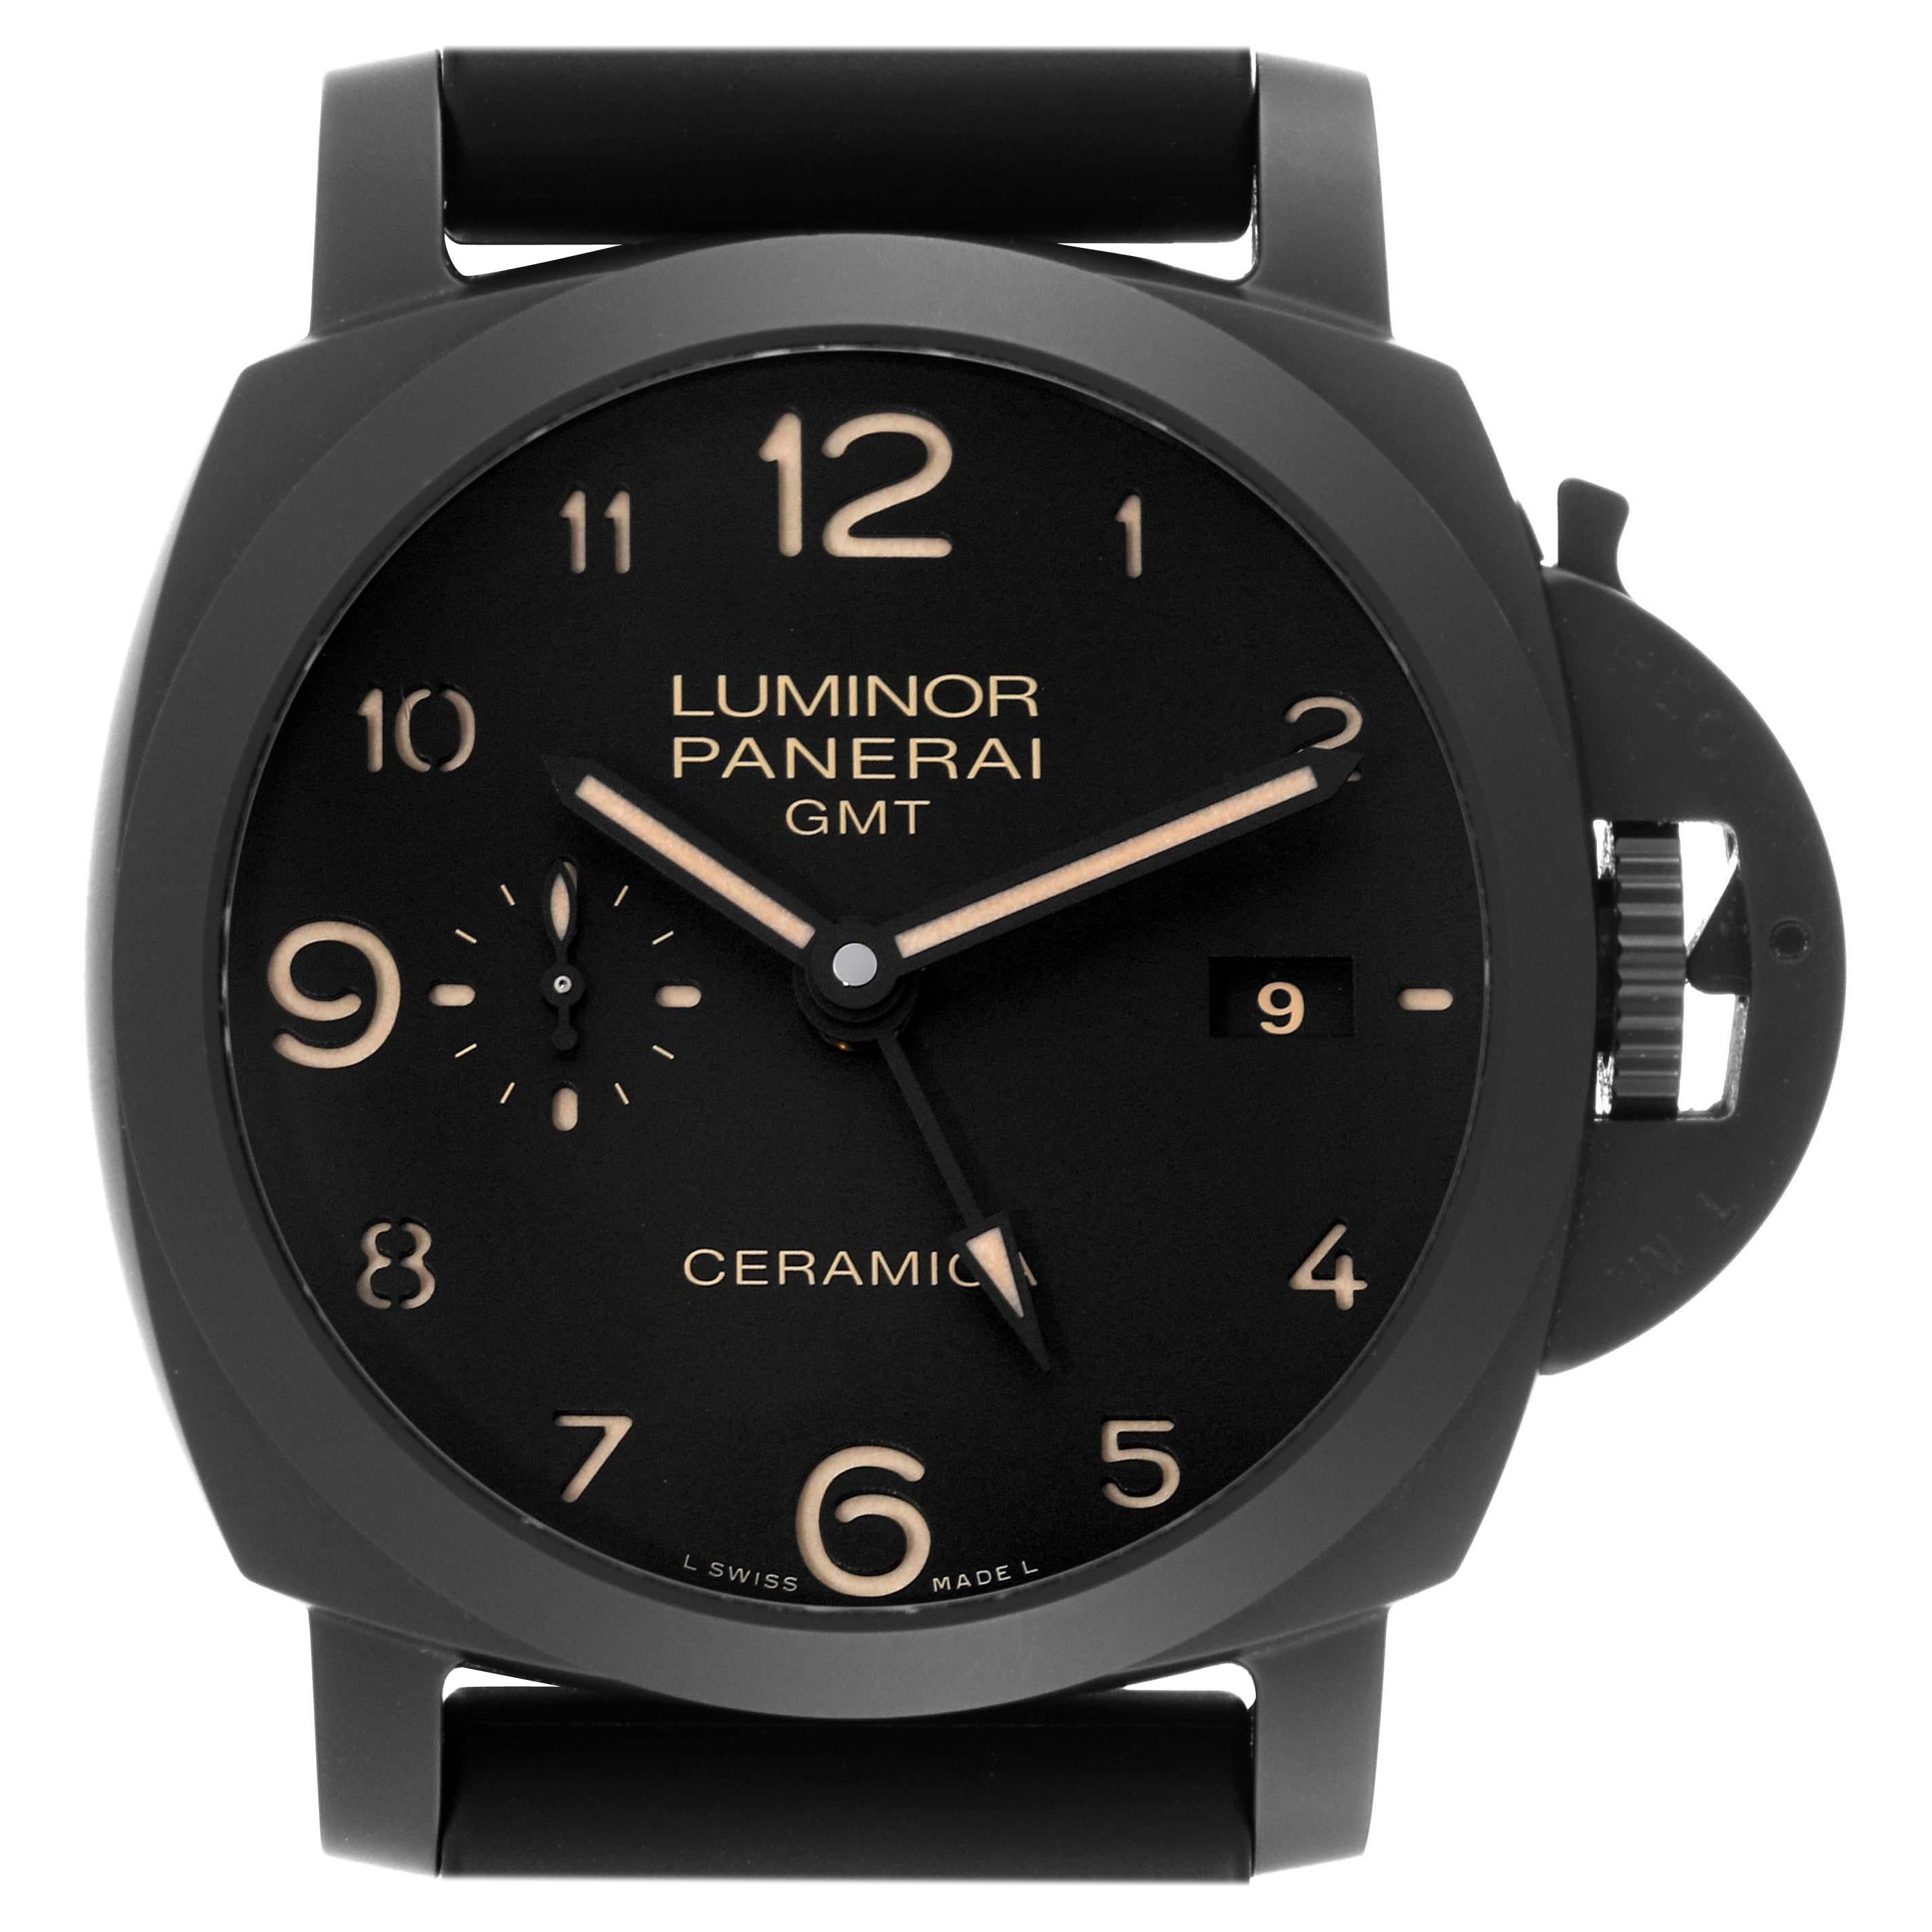 Panerai Luminor 1950 3 Days GMT Ceramic Limited Edition Mens Watch PAM00441 For Sale